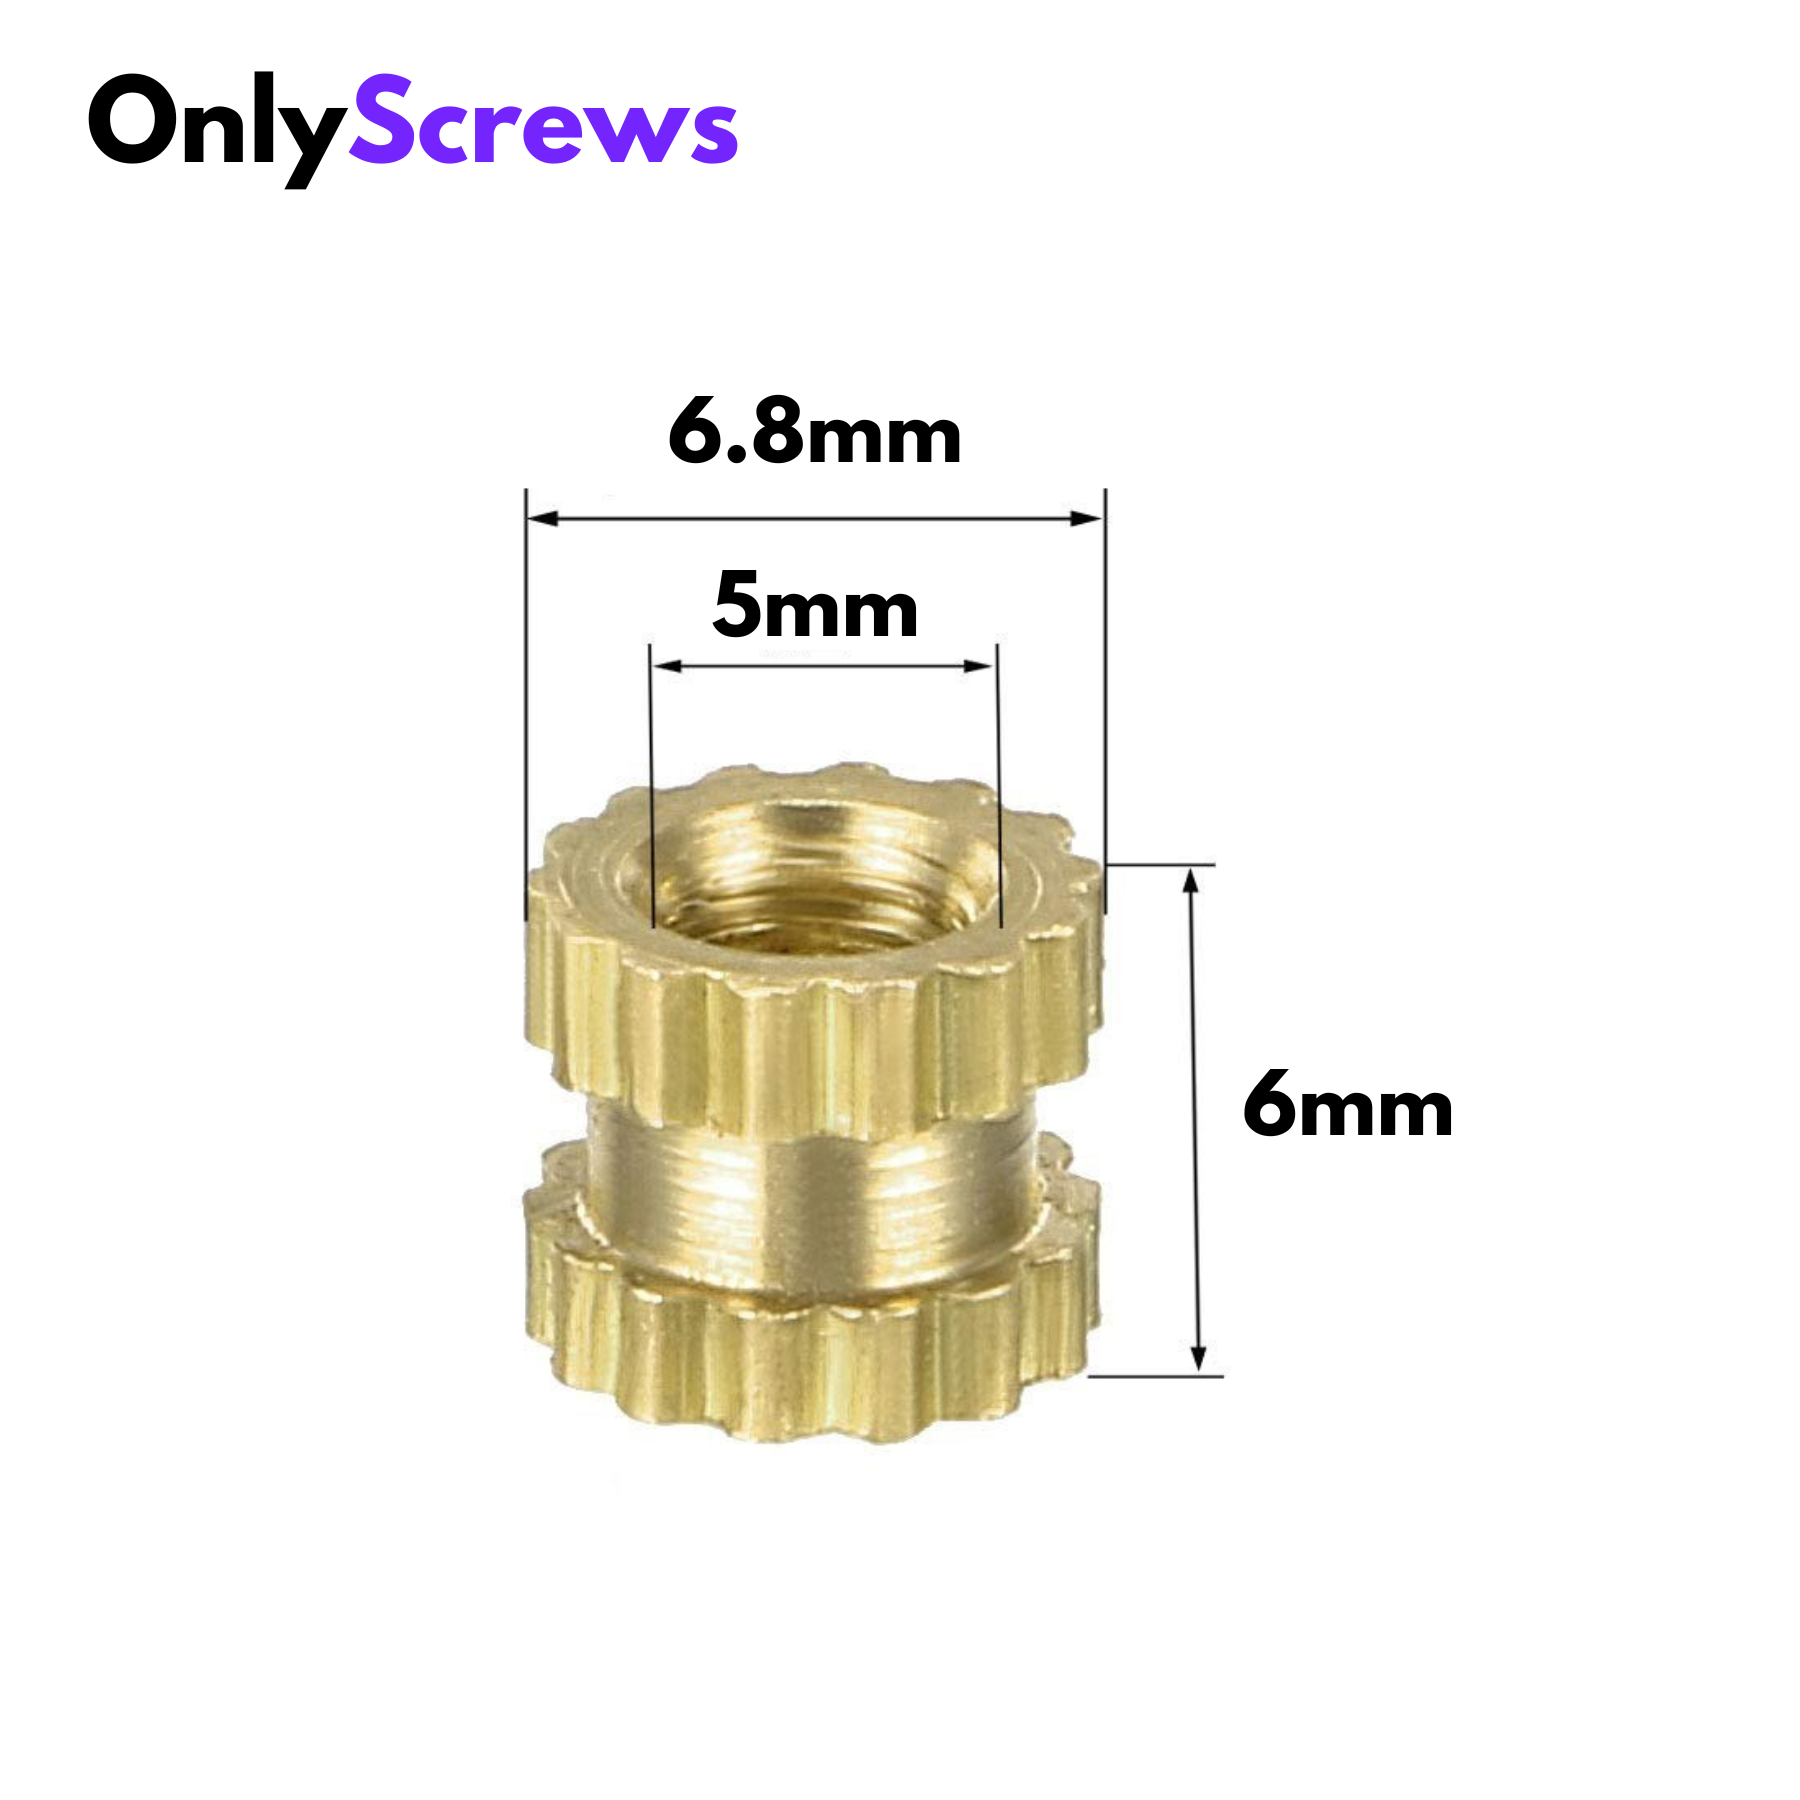 M5 X 6mm Brass threaded inserts with dimensions